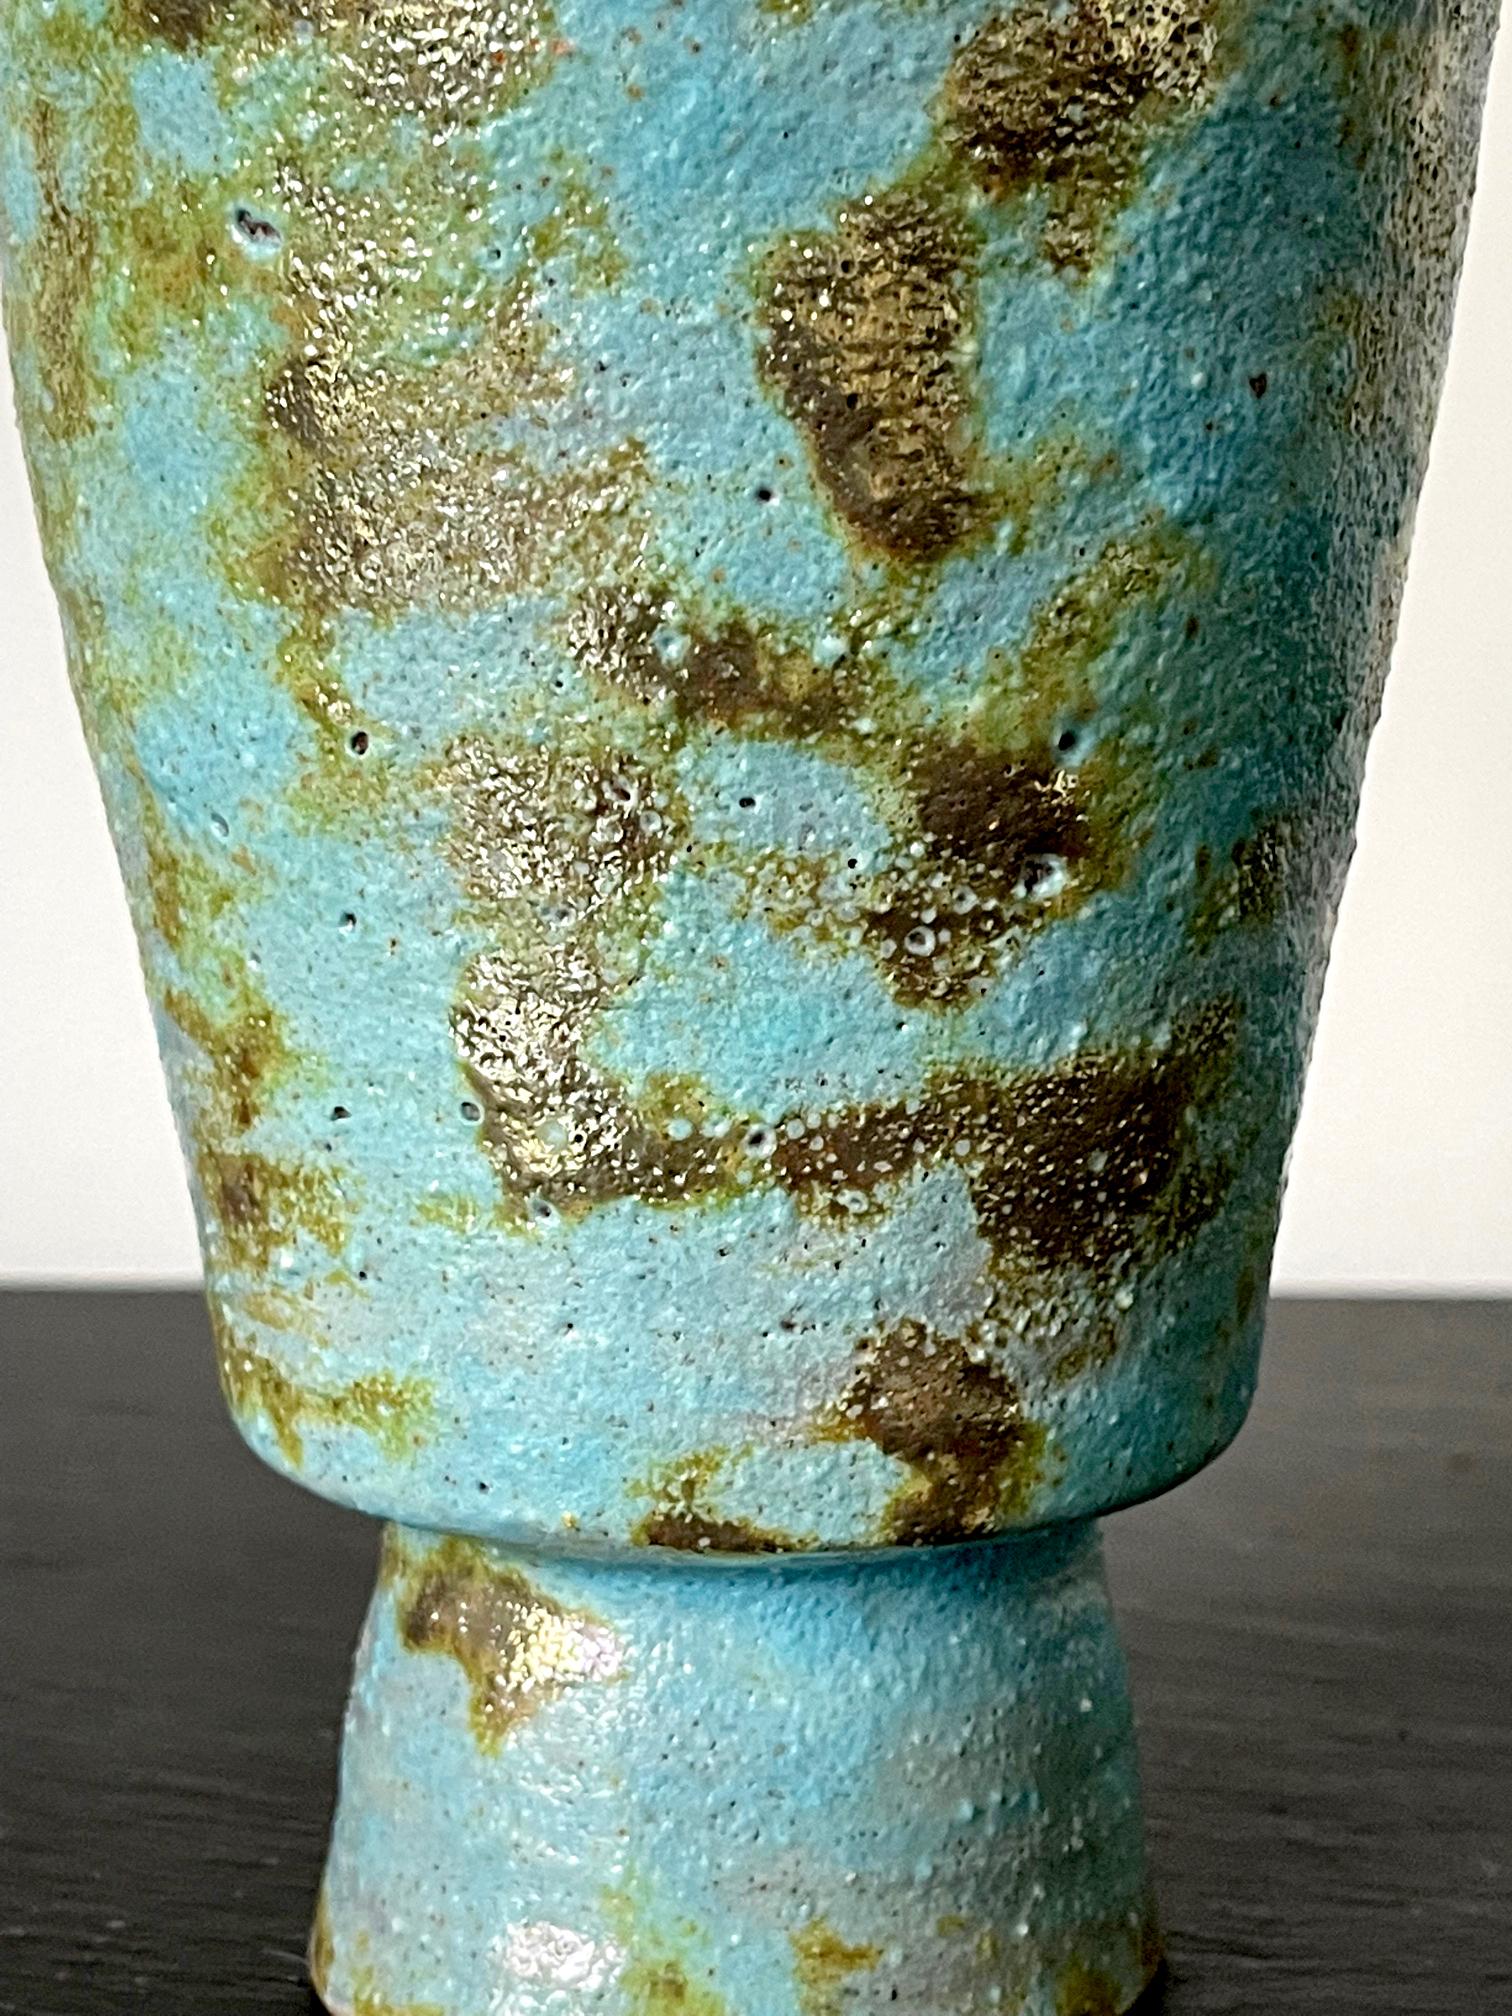 20th Century Ceramic Vase with Volcanic and Metallic Glaze by Beatrice Wood For Sale